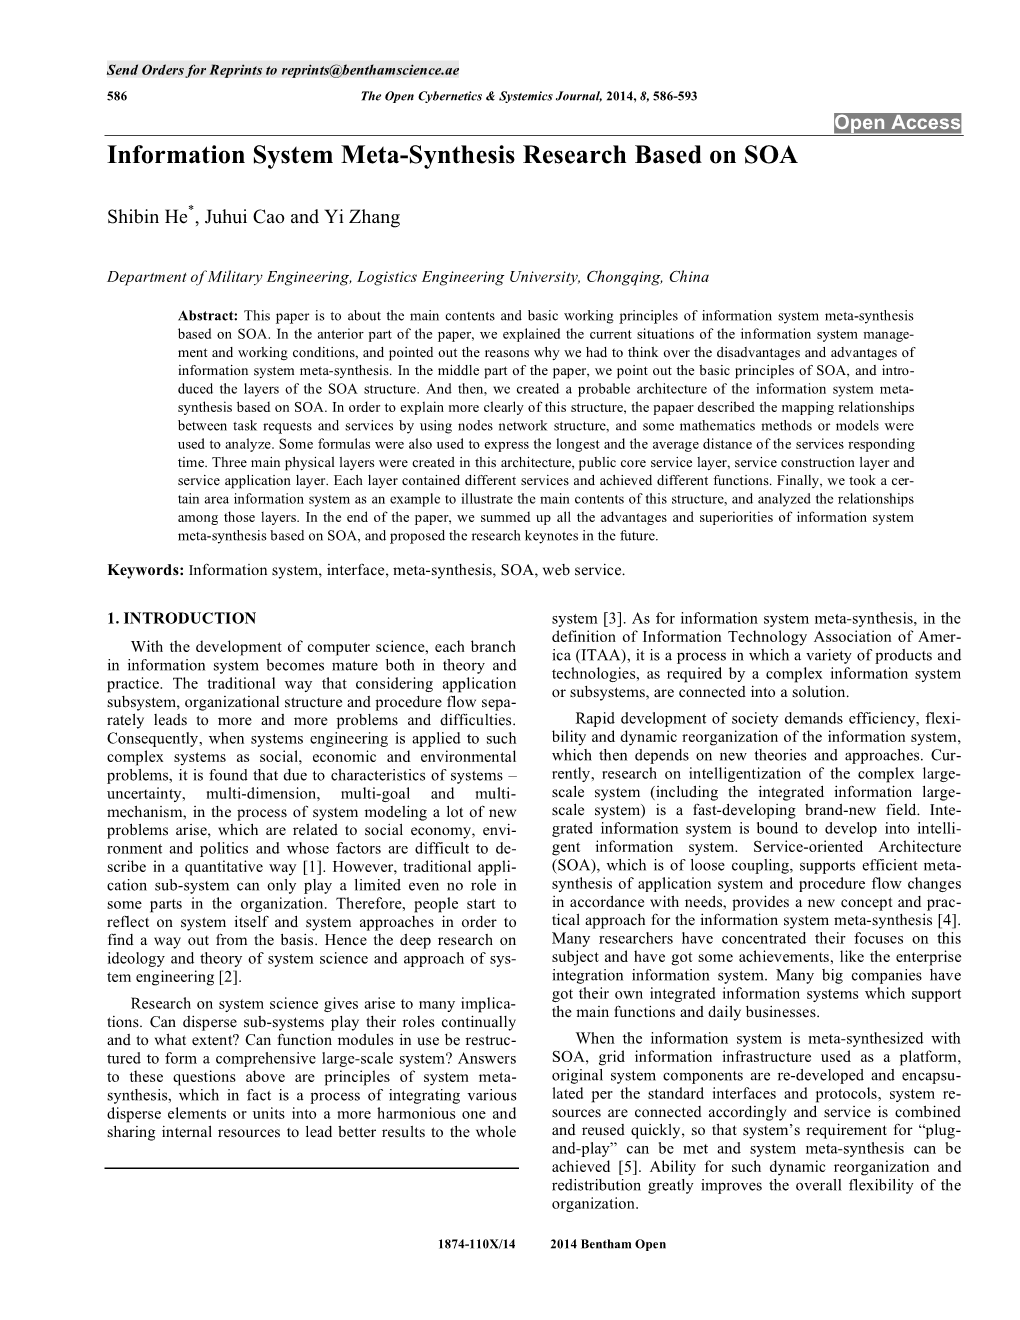 Information System Meta-Synthesis Research Based on SOA